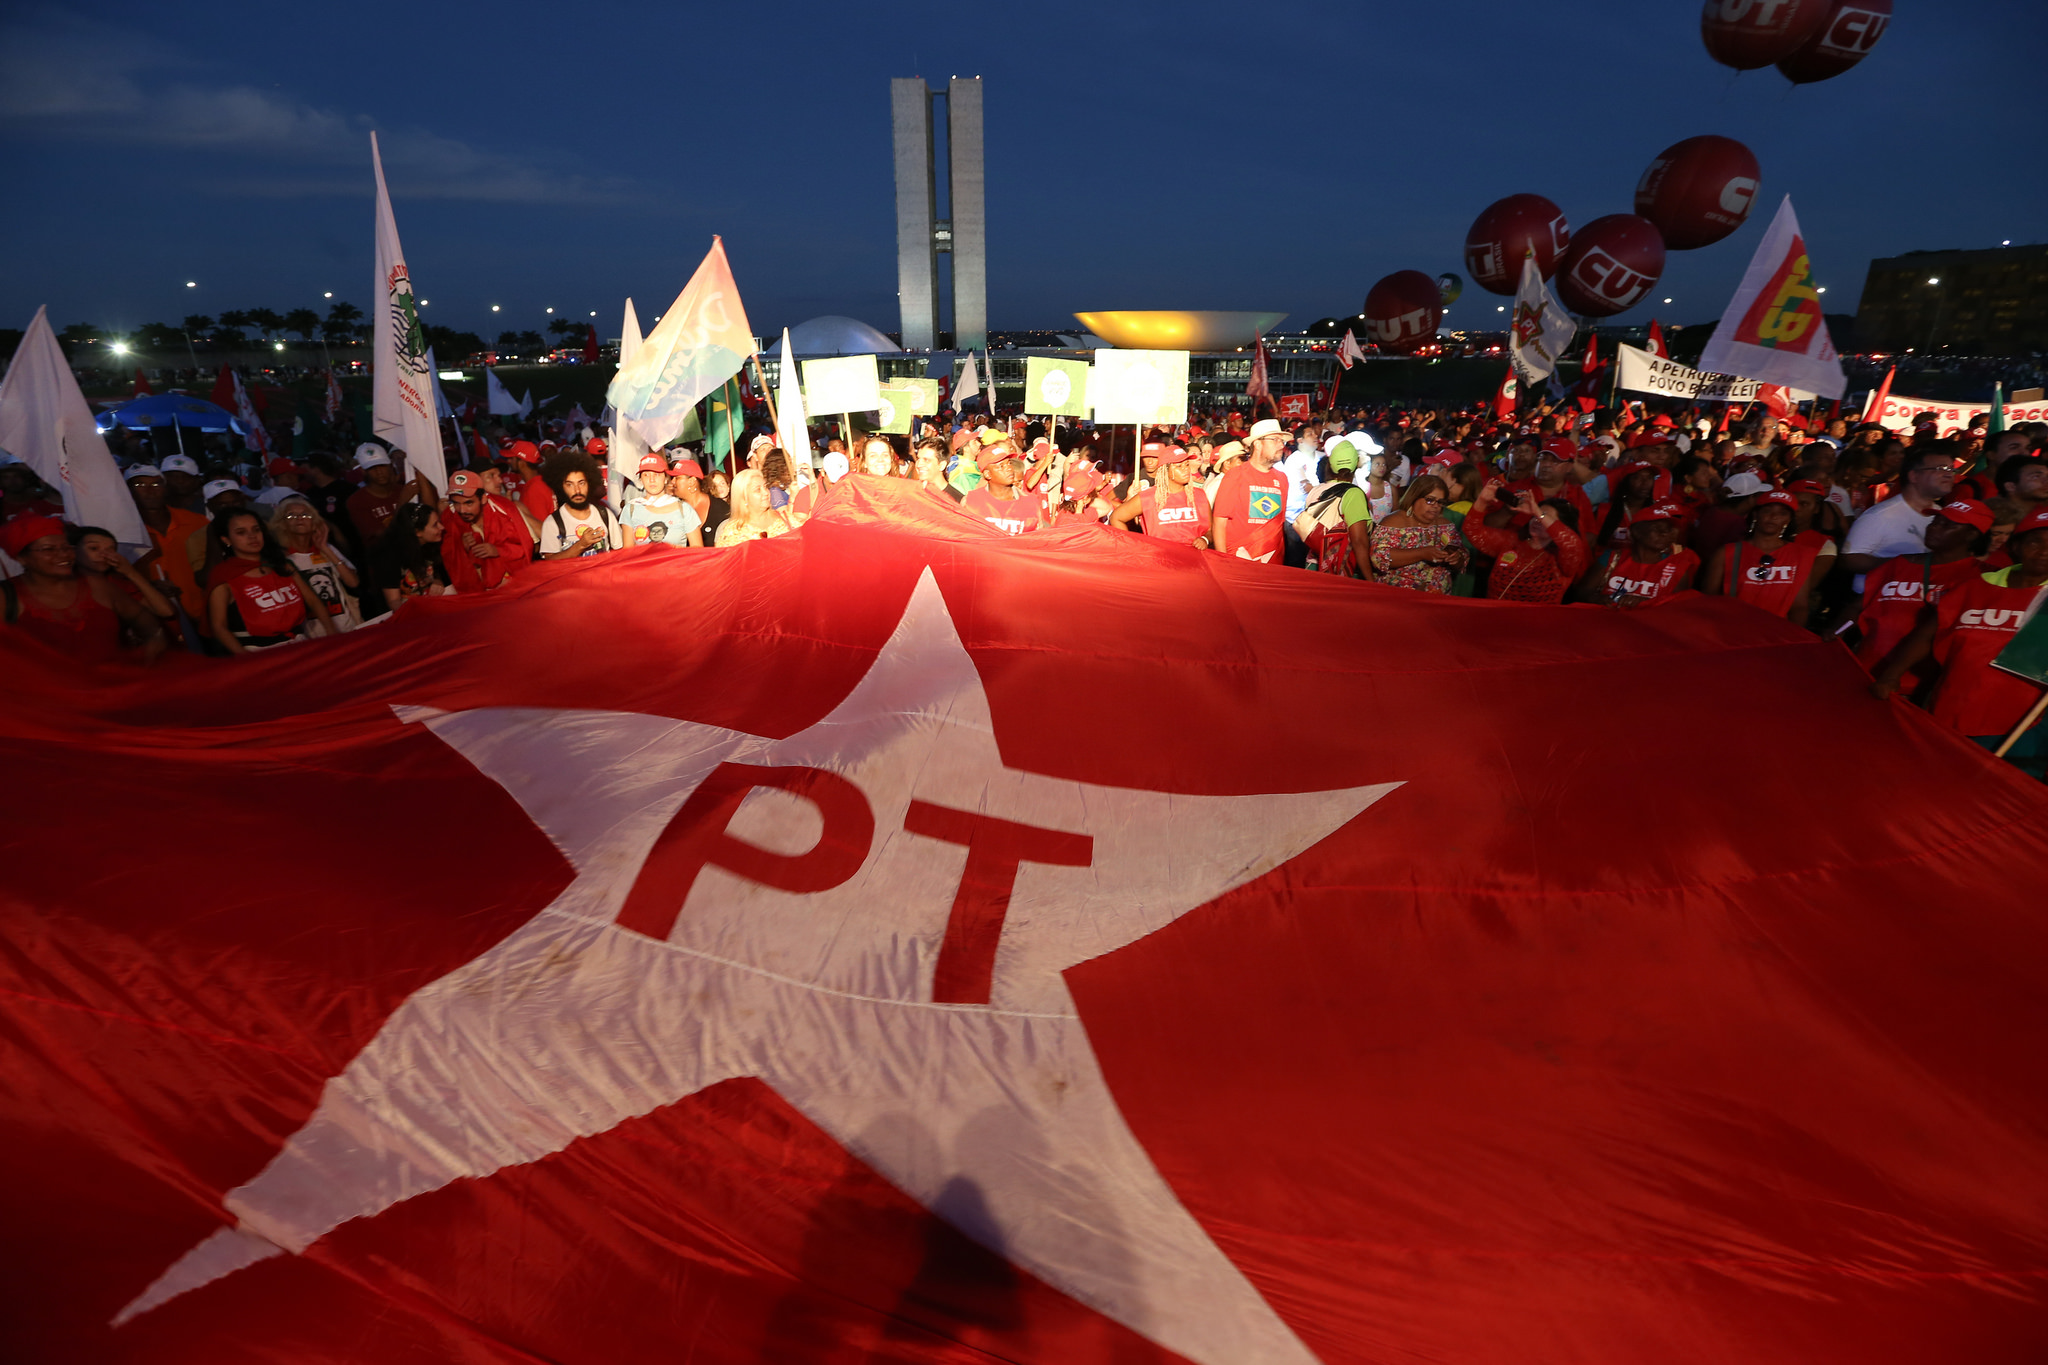 The flag of Lula's PT party. What does it remind you of at first sight? (Photo internet reproduction)